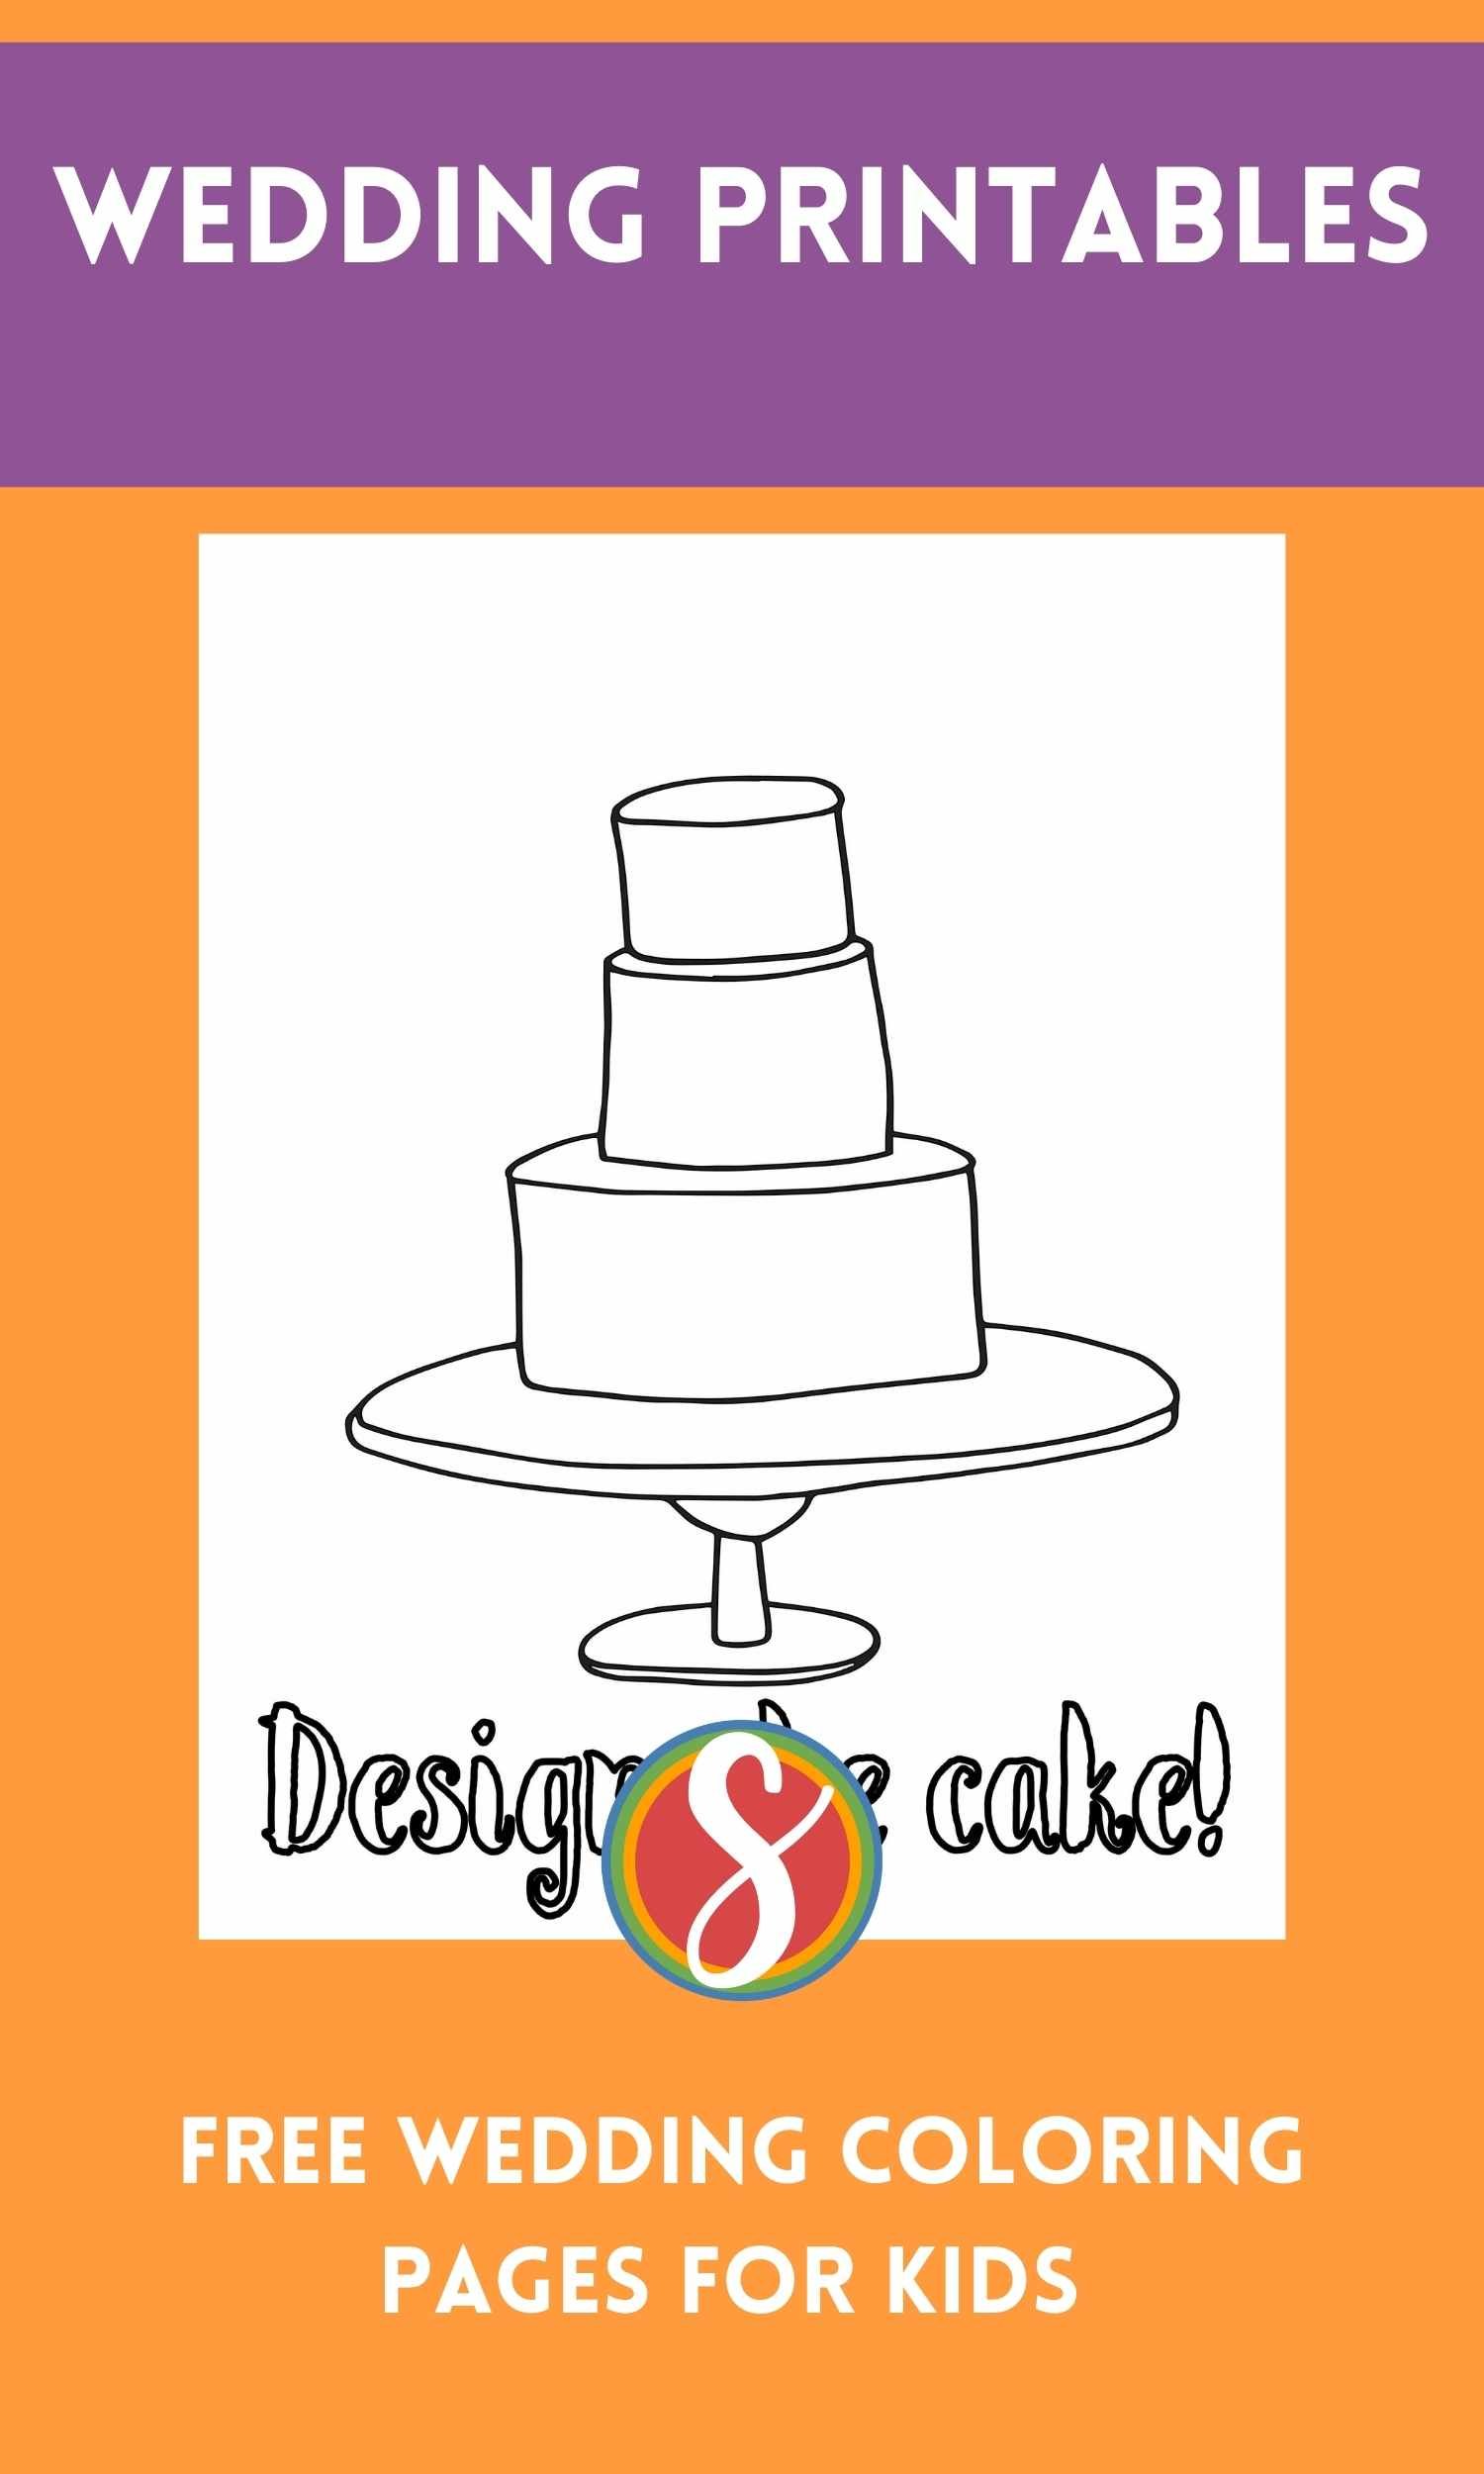 Free wedding coloring pages â stevie doodles